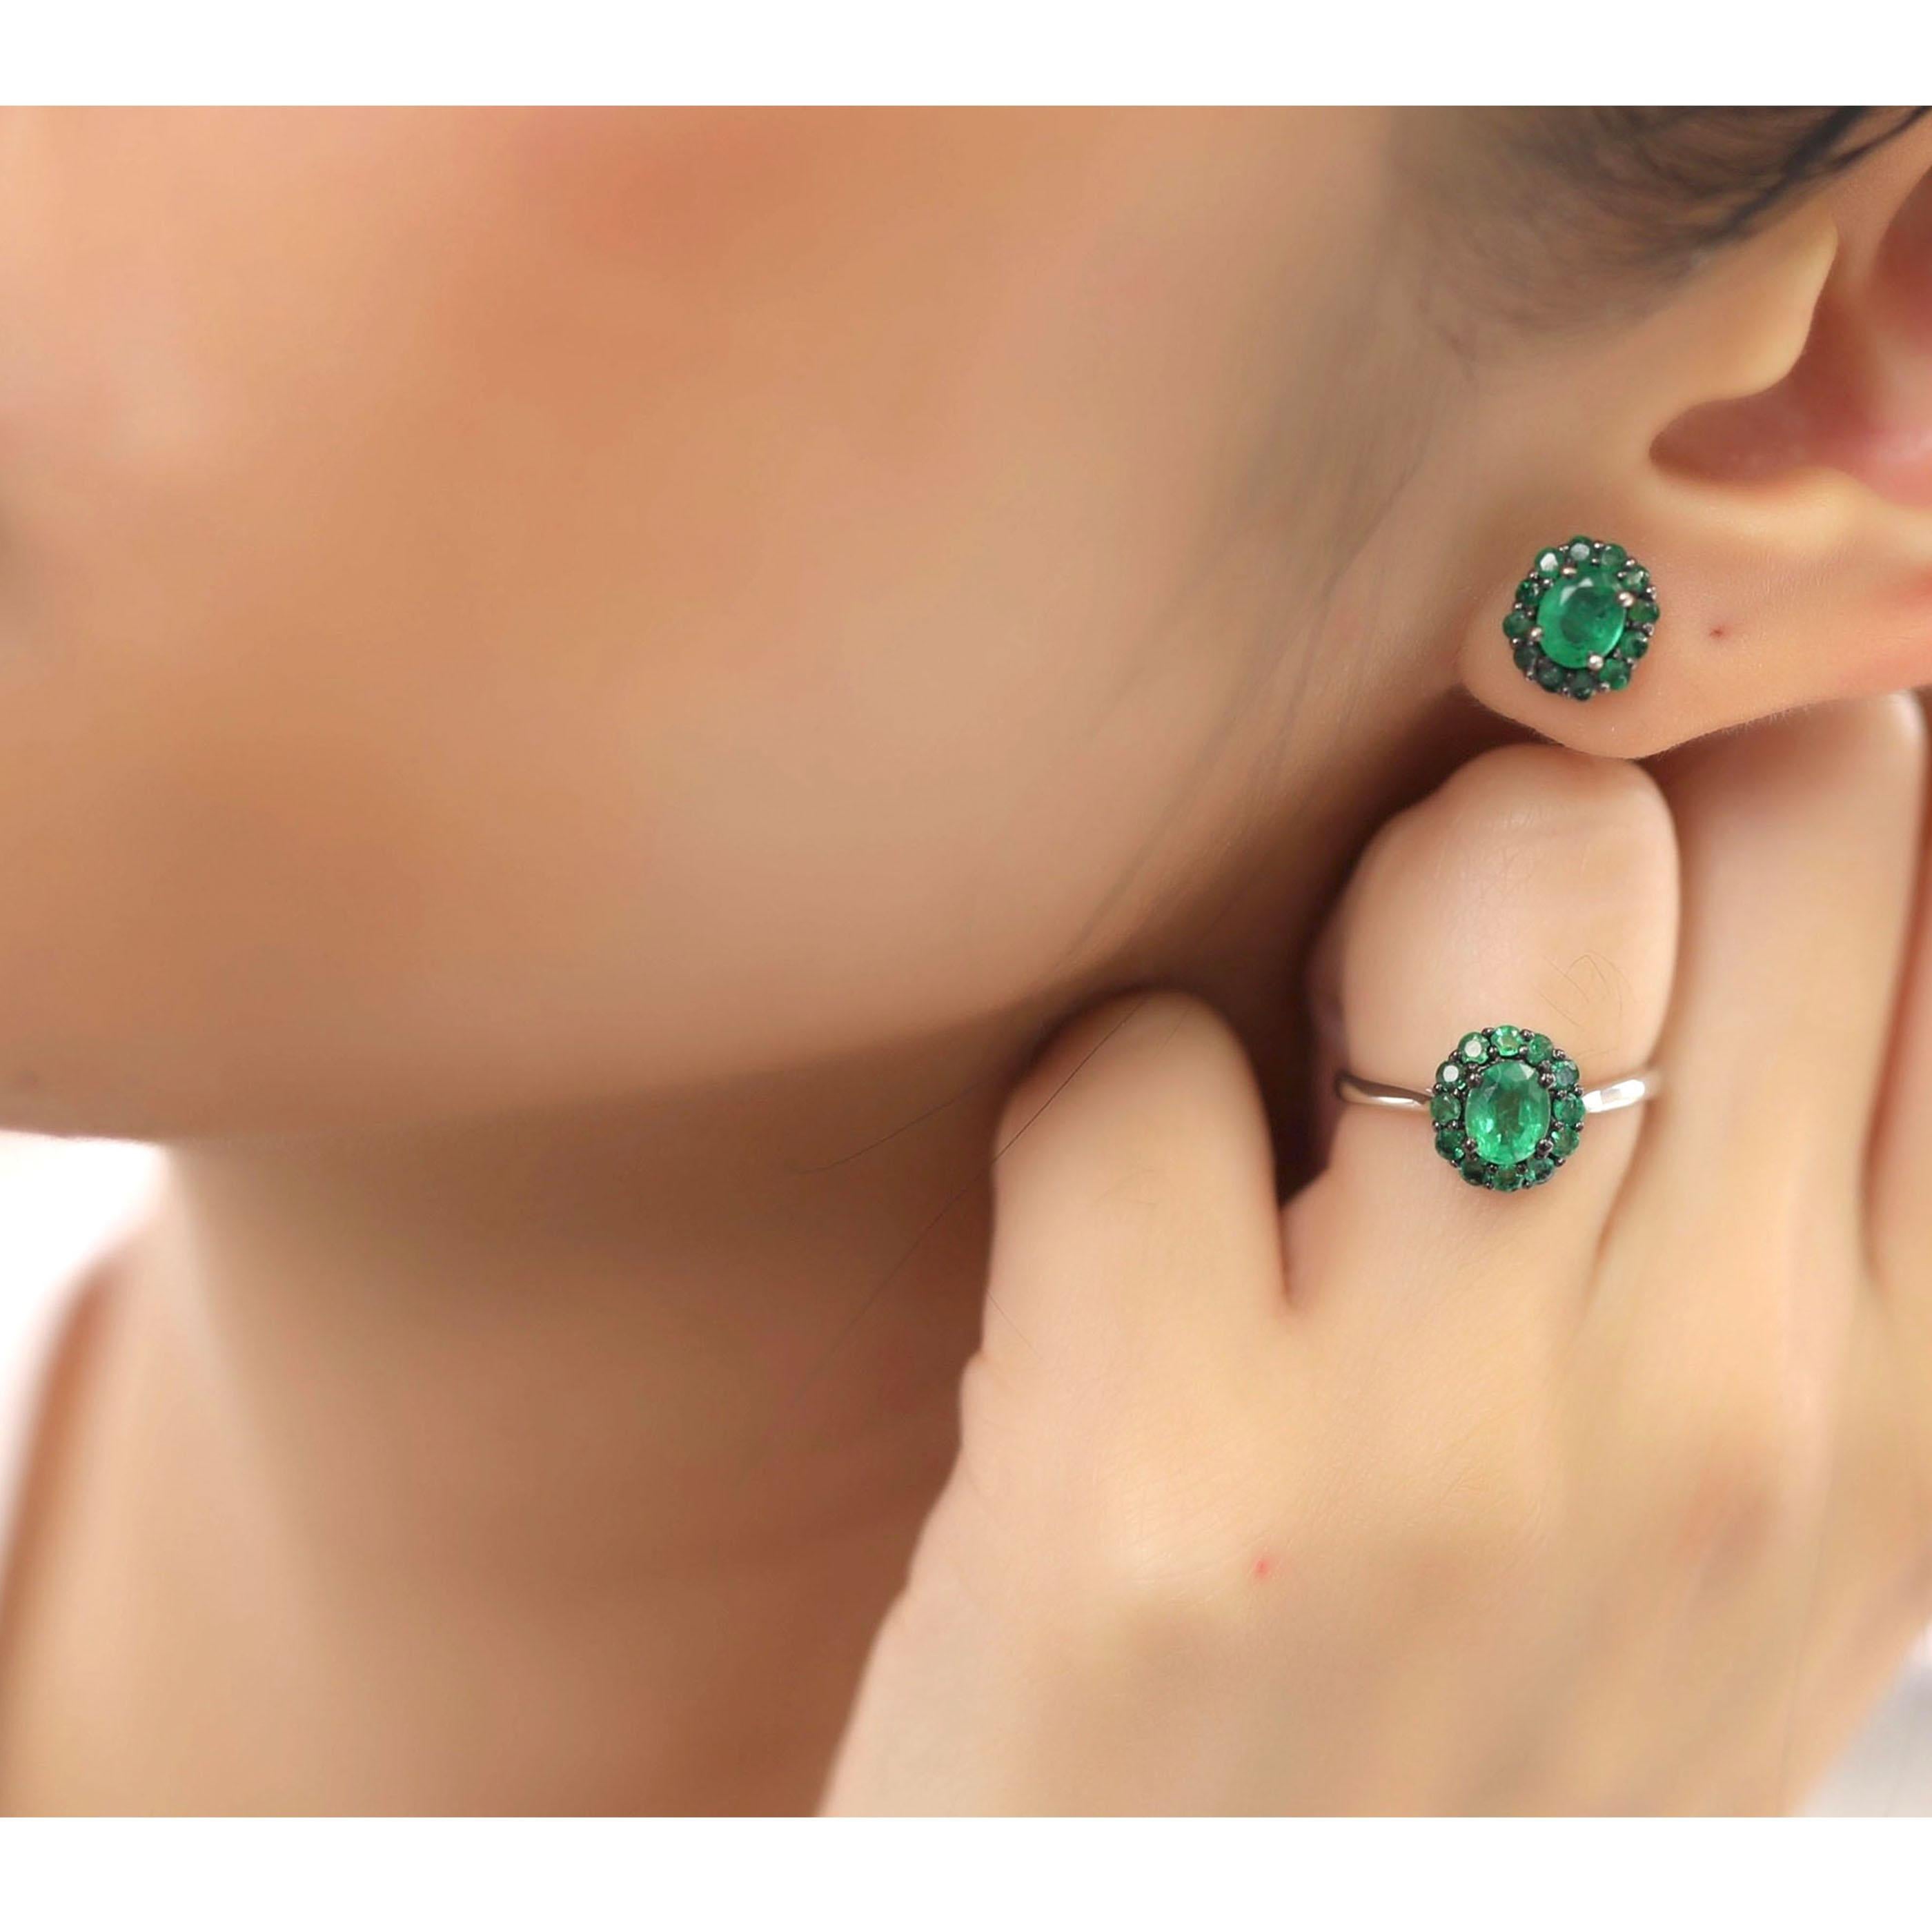 This small emerald earring and ring set is crafted in 18-karat white gold, weighing approximately 2.80 total carats of emerald stones. The ring is comfortable and can be sized 